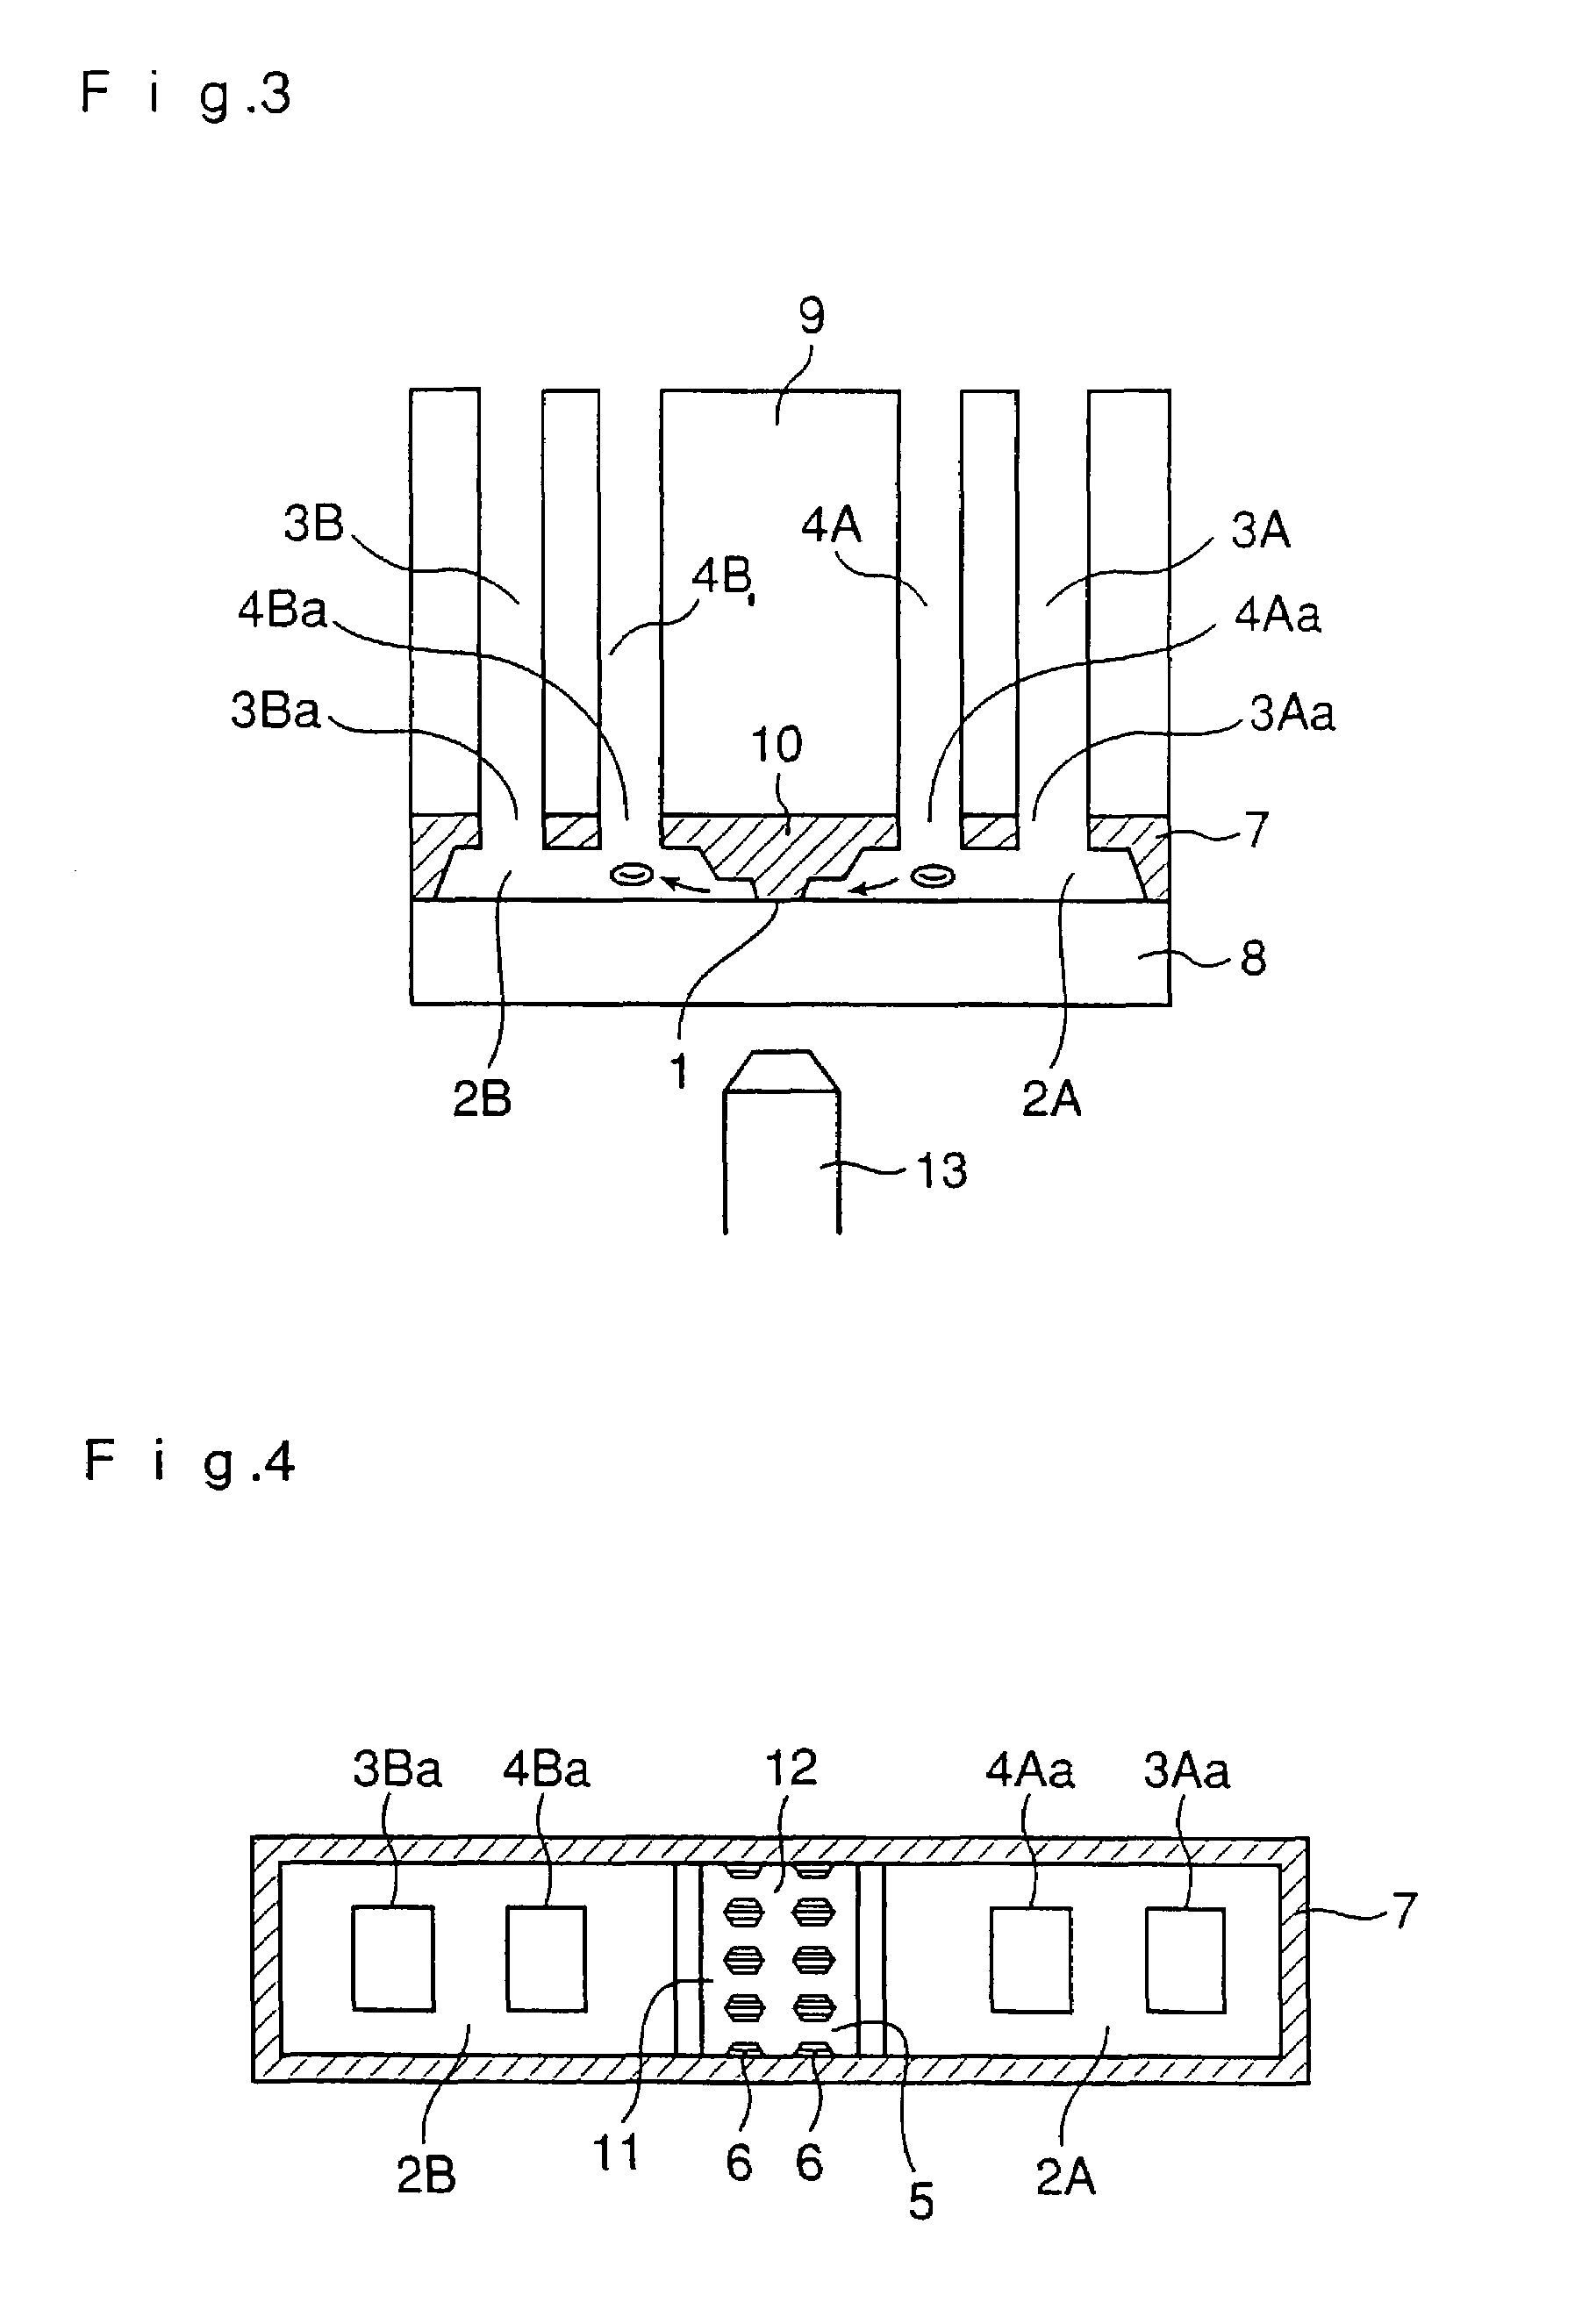 Well unit for detecting cell chemotaxis and separating chemotactic cells